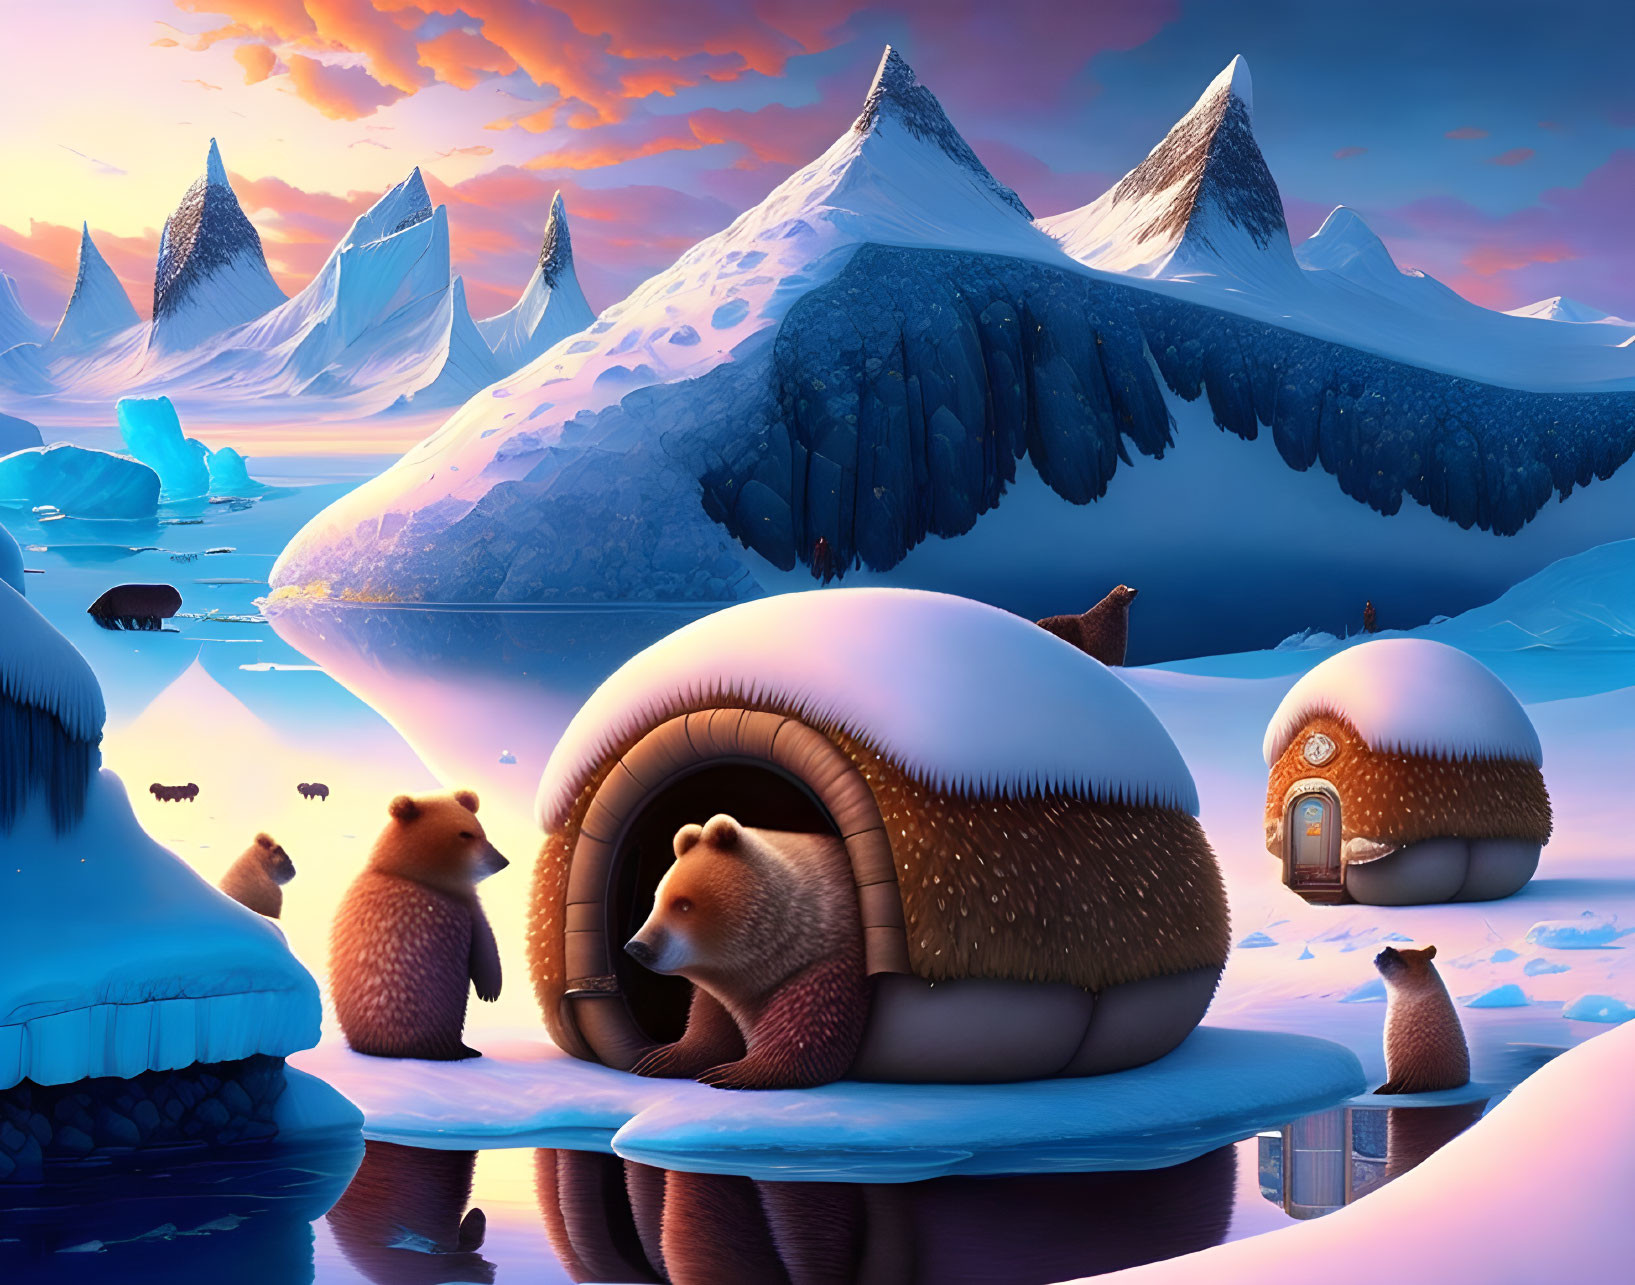 Whimsical wintry scene with bears and igloo-like structures